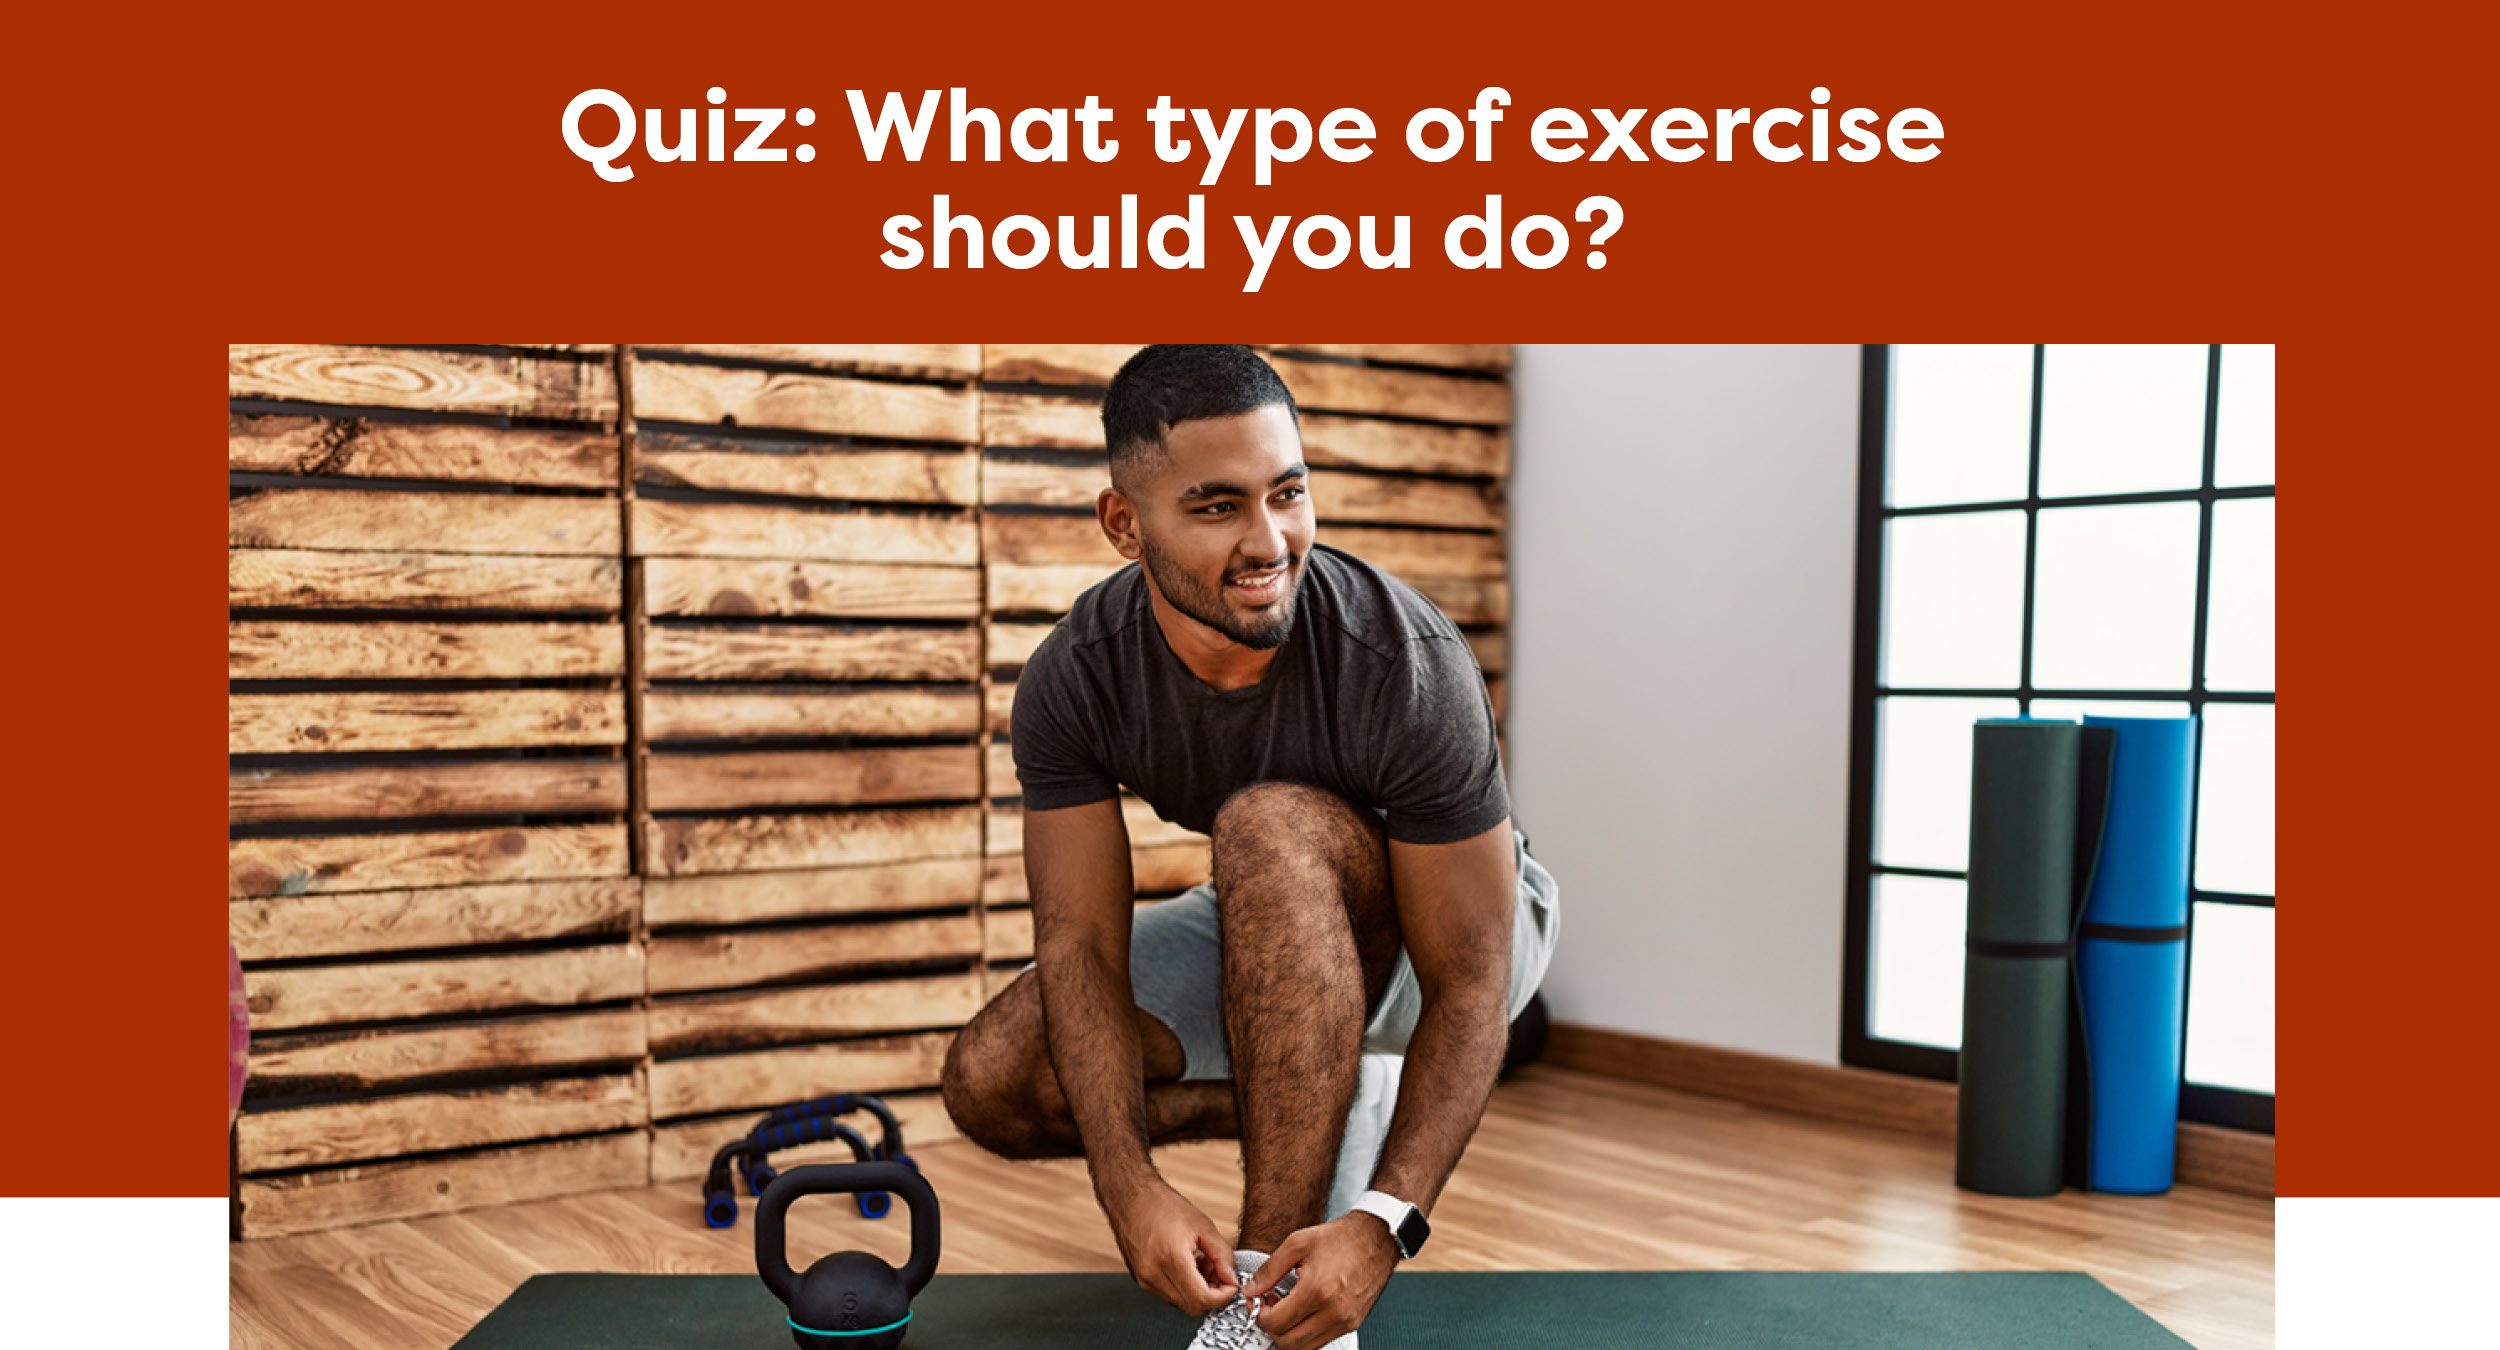 Quiz: What type of exercise should you do?